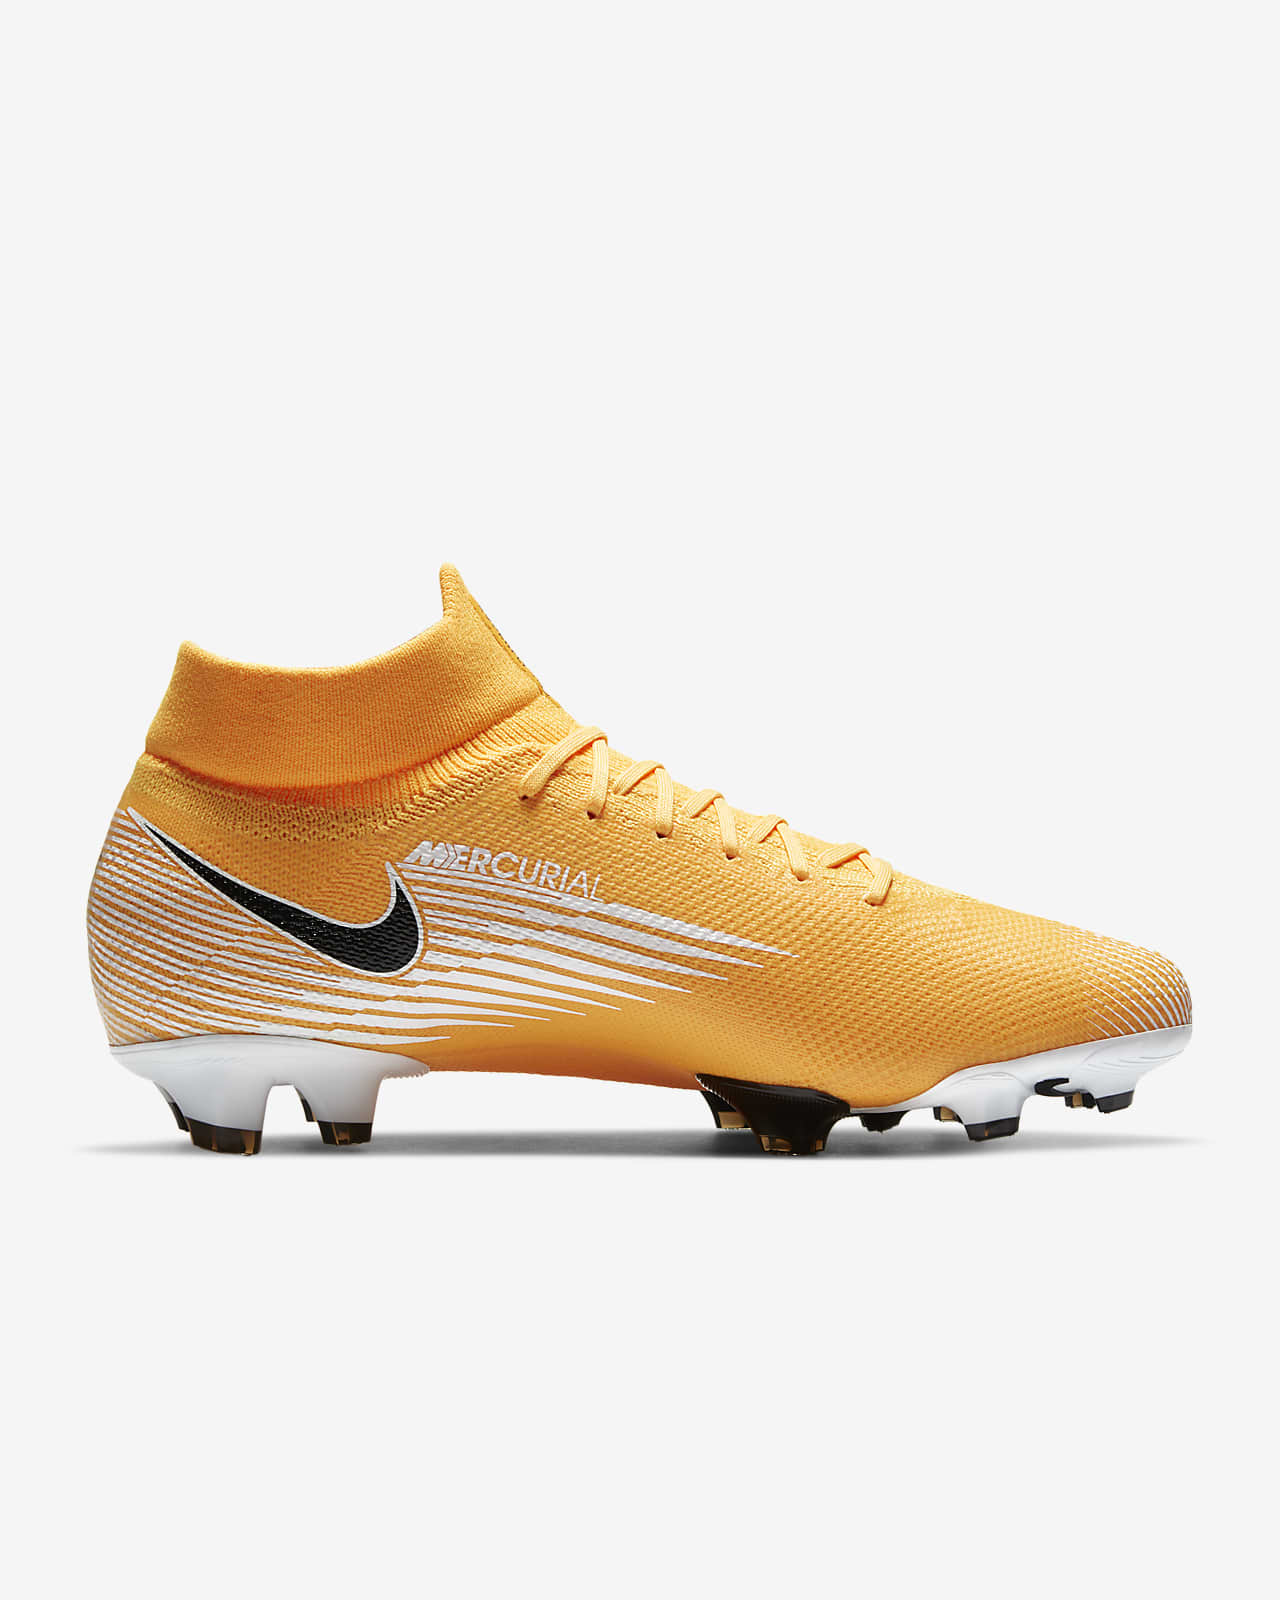 Nike Mercurial Superfly 7 Pro FG Firm-Ground Football Boot. Nike ID